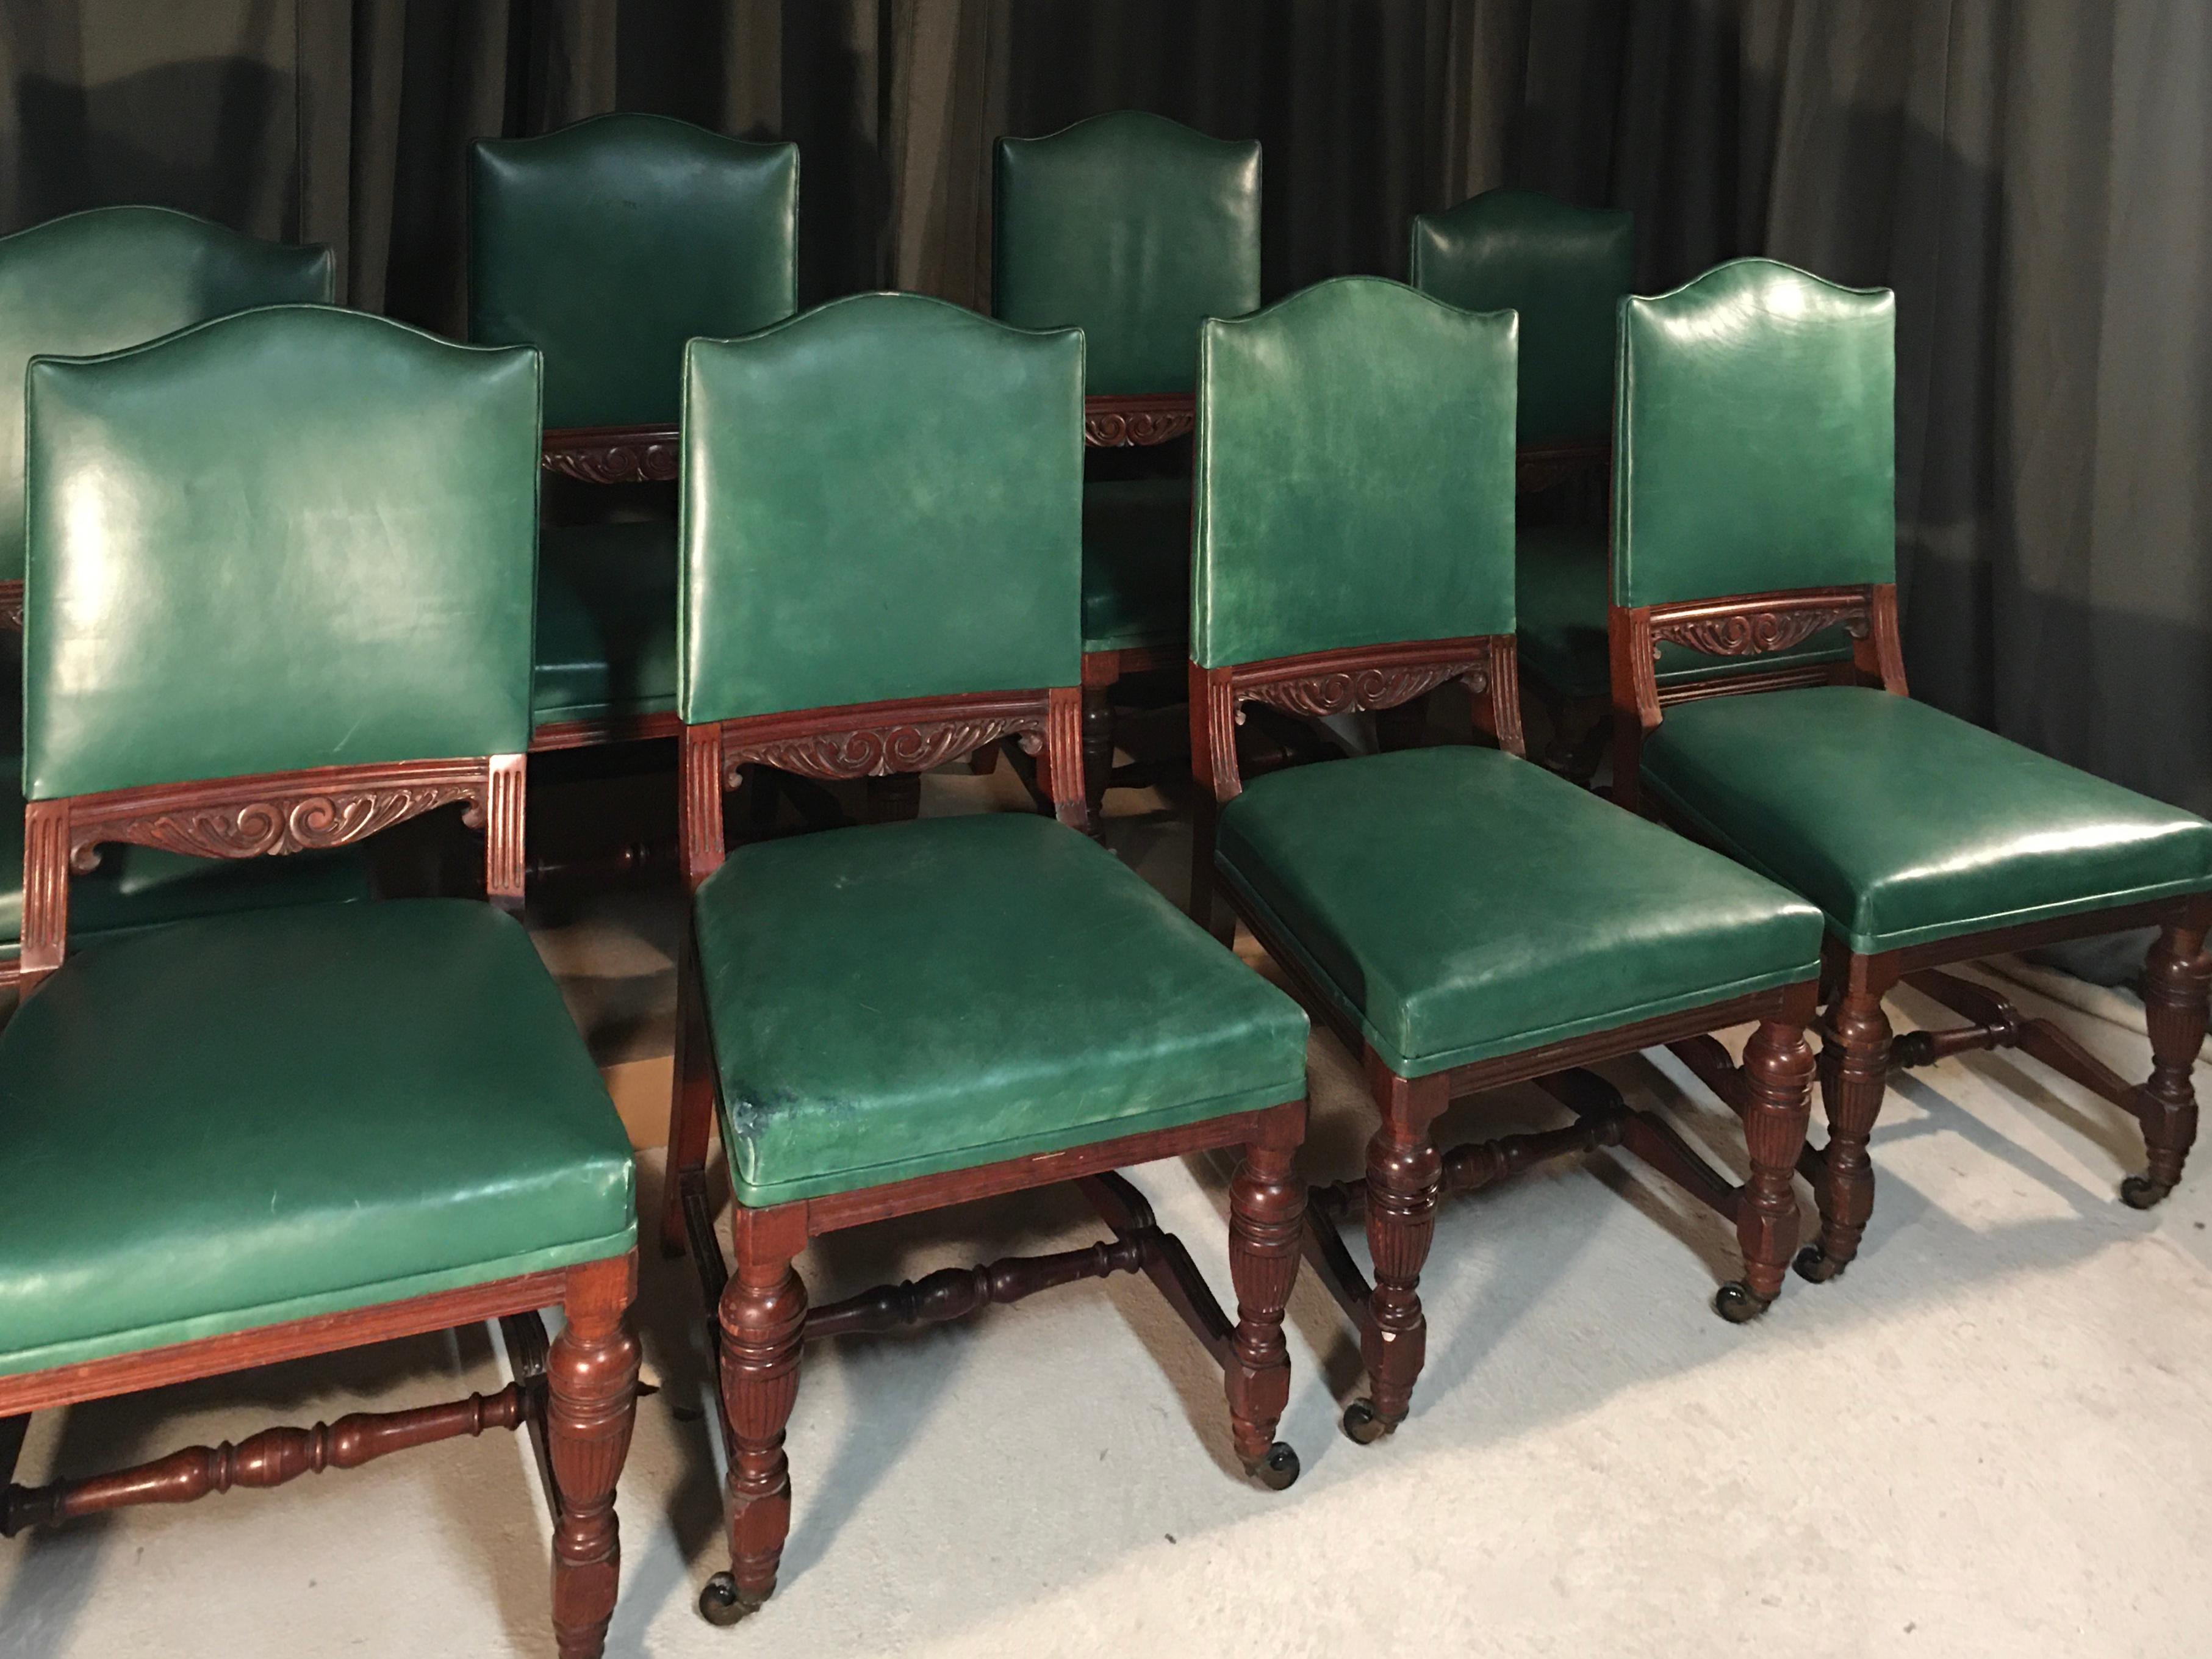 Early Victorian Series of 8 English Chairs in Green Leather, Mahogany, Early 20th Century For Sale